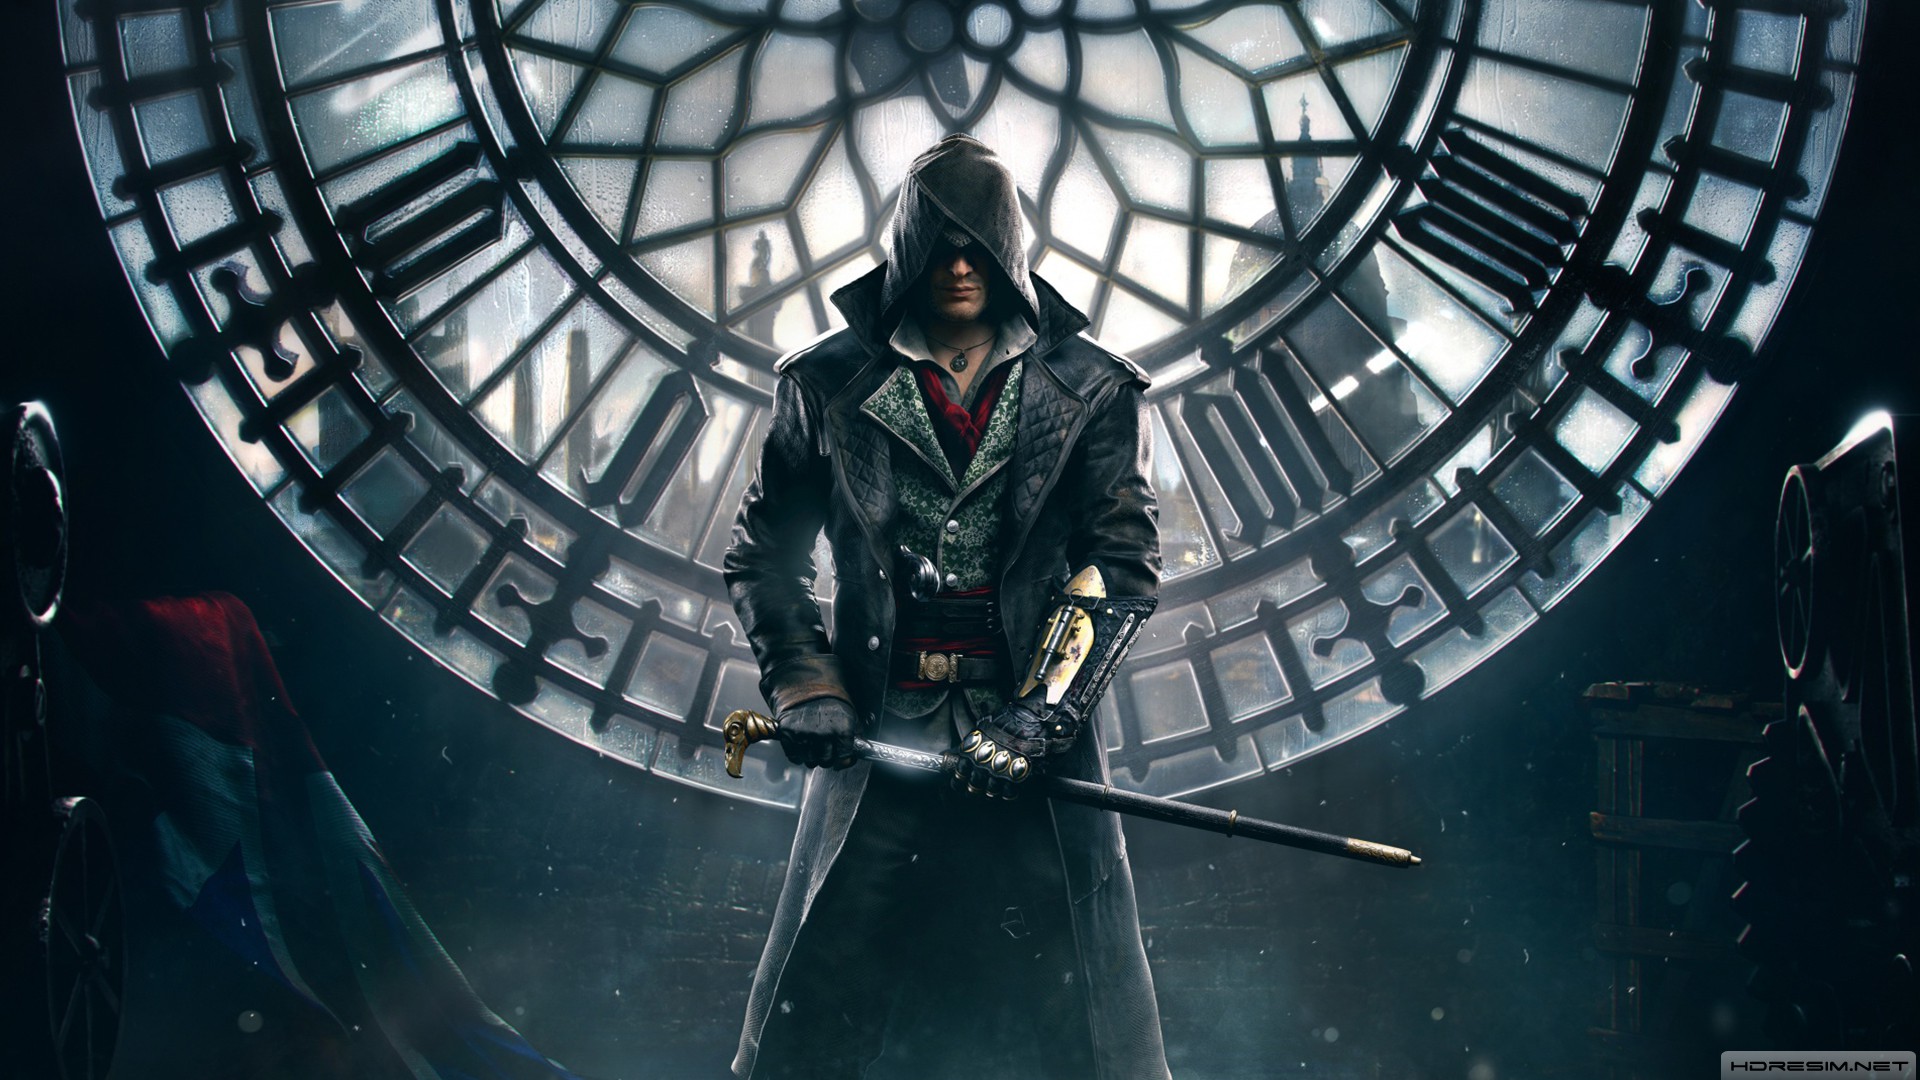 assassins creed,syndicate,oyun,tps,2015